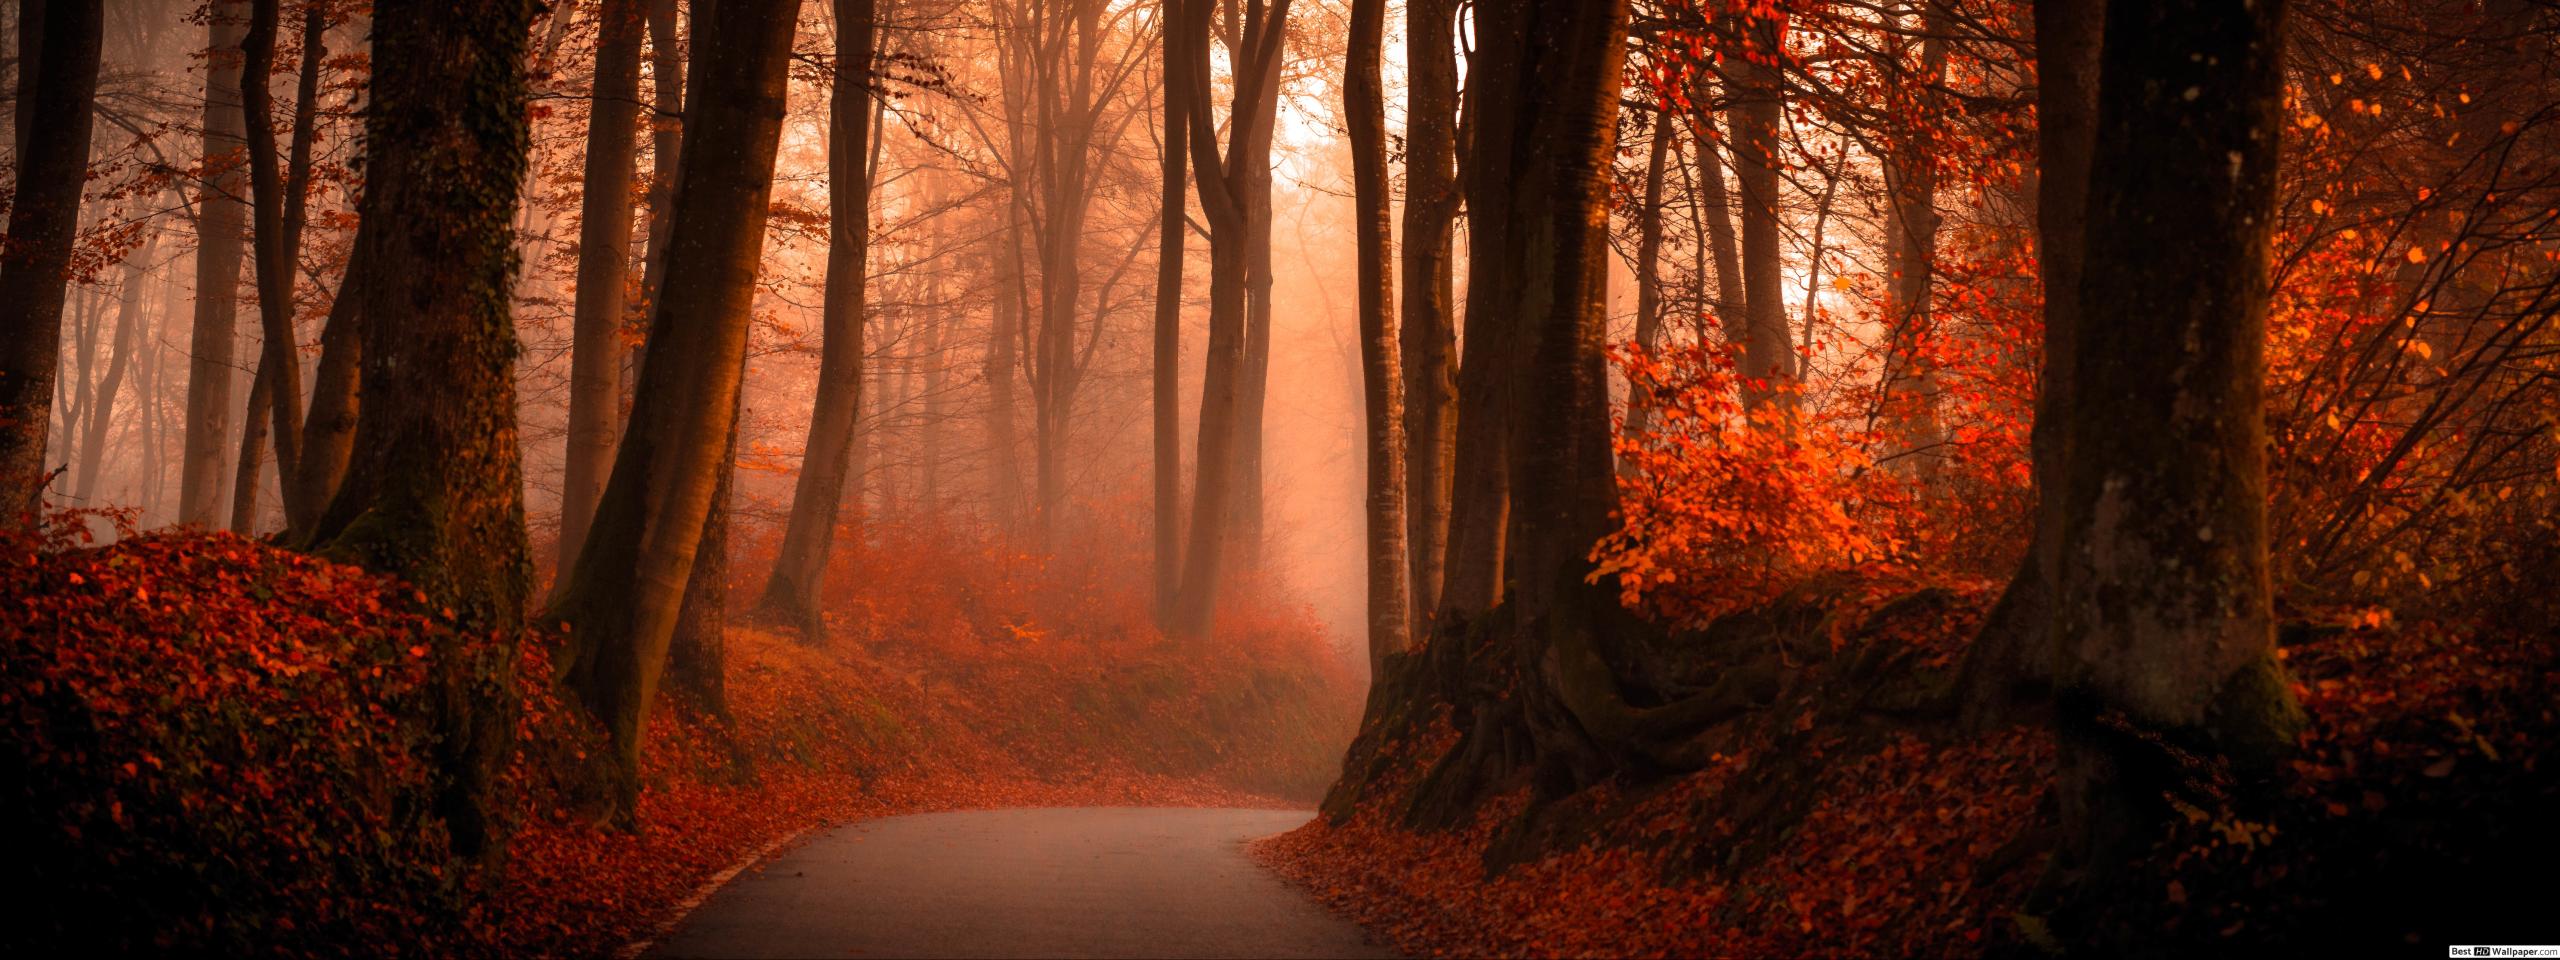 Foggy Winding Road in Autumn Forest HD wallpaper download